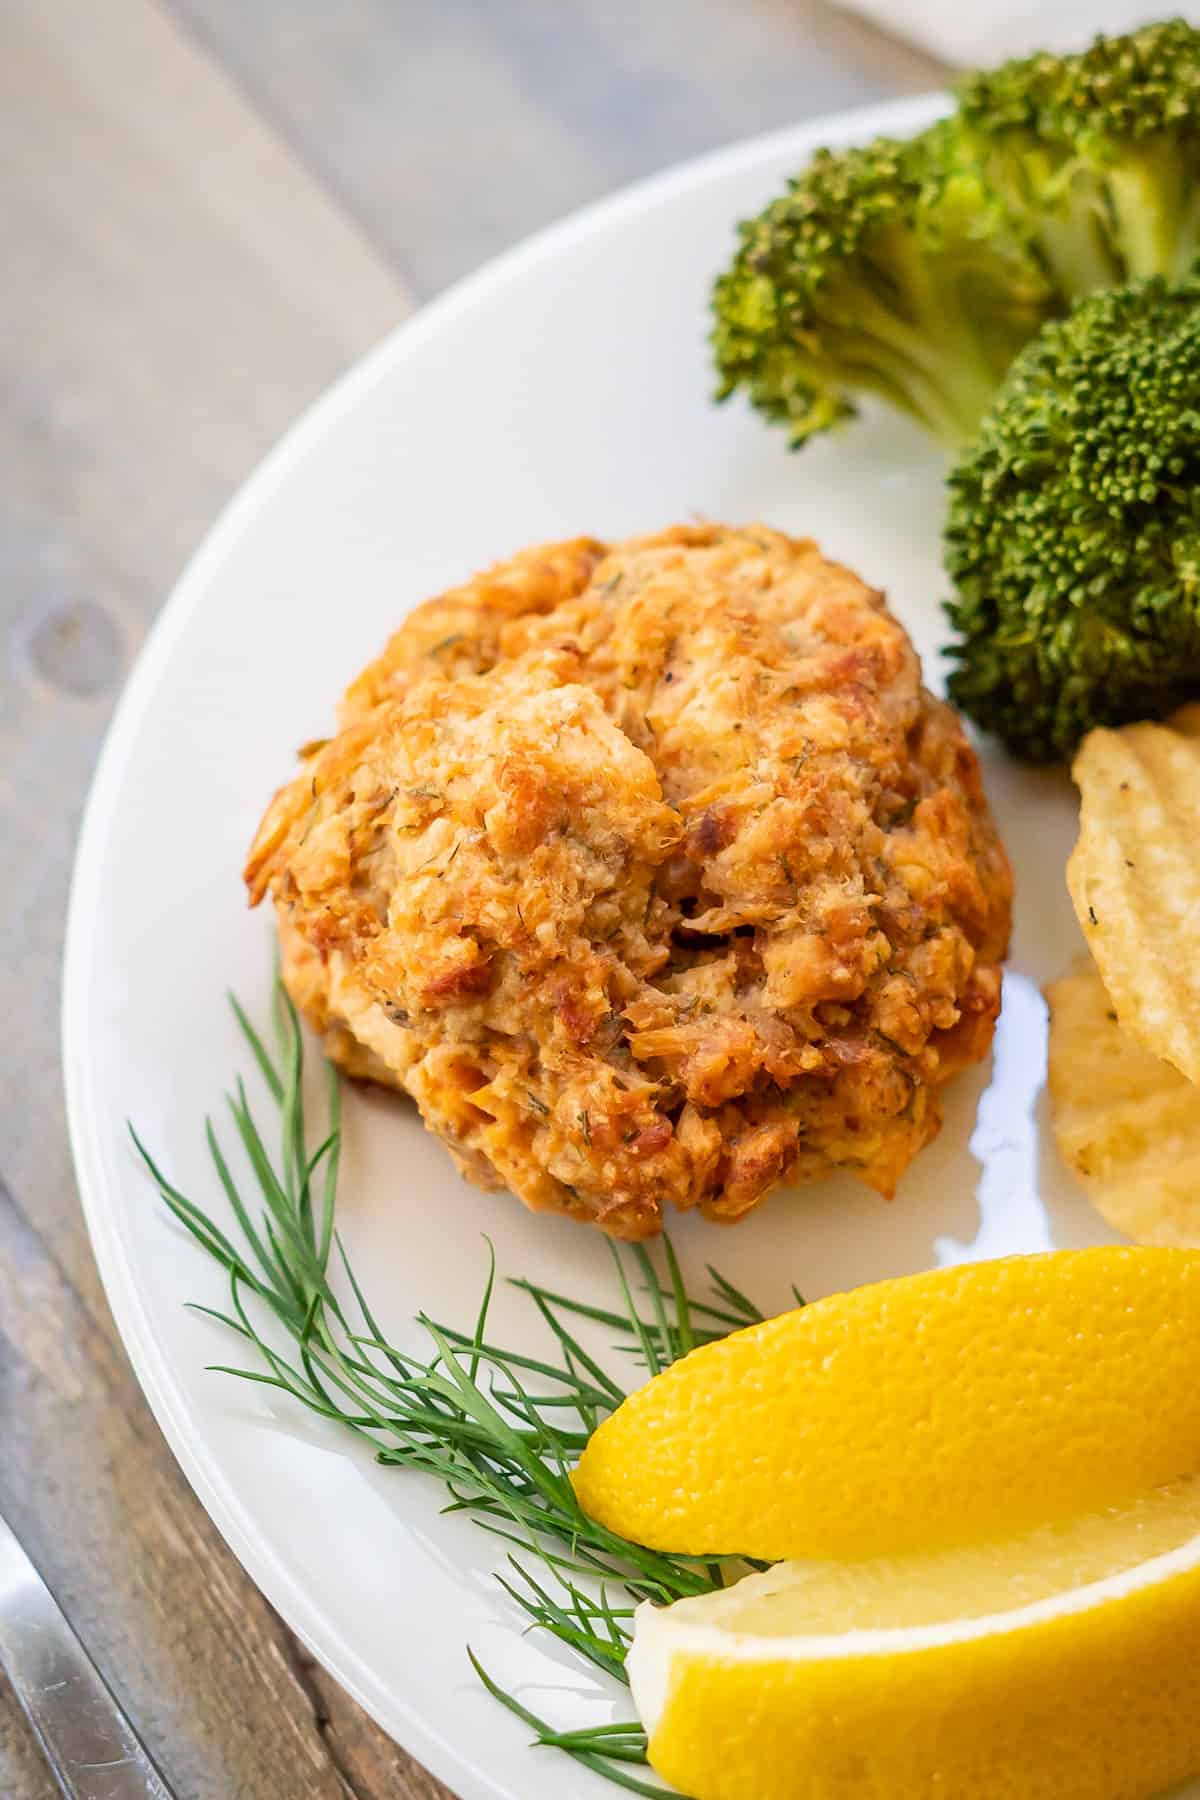 A crispy baked salmon cake with canned salmon served with broccoli, lemon, and fresh dill.